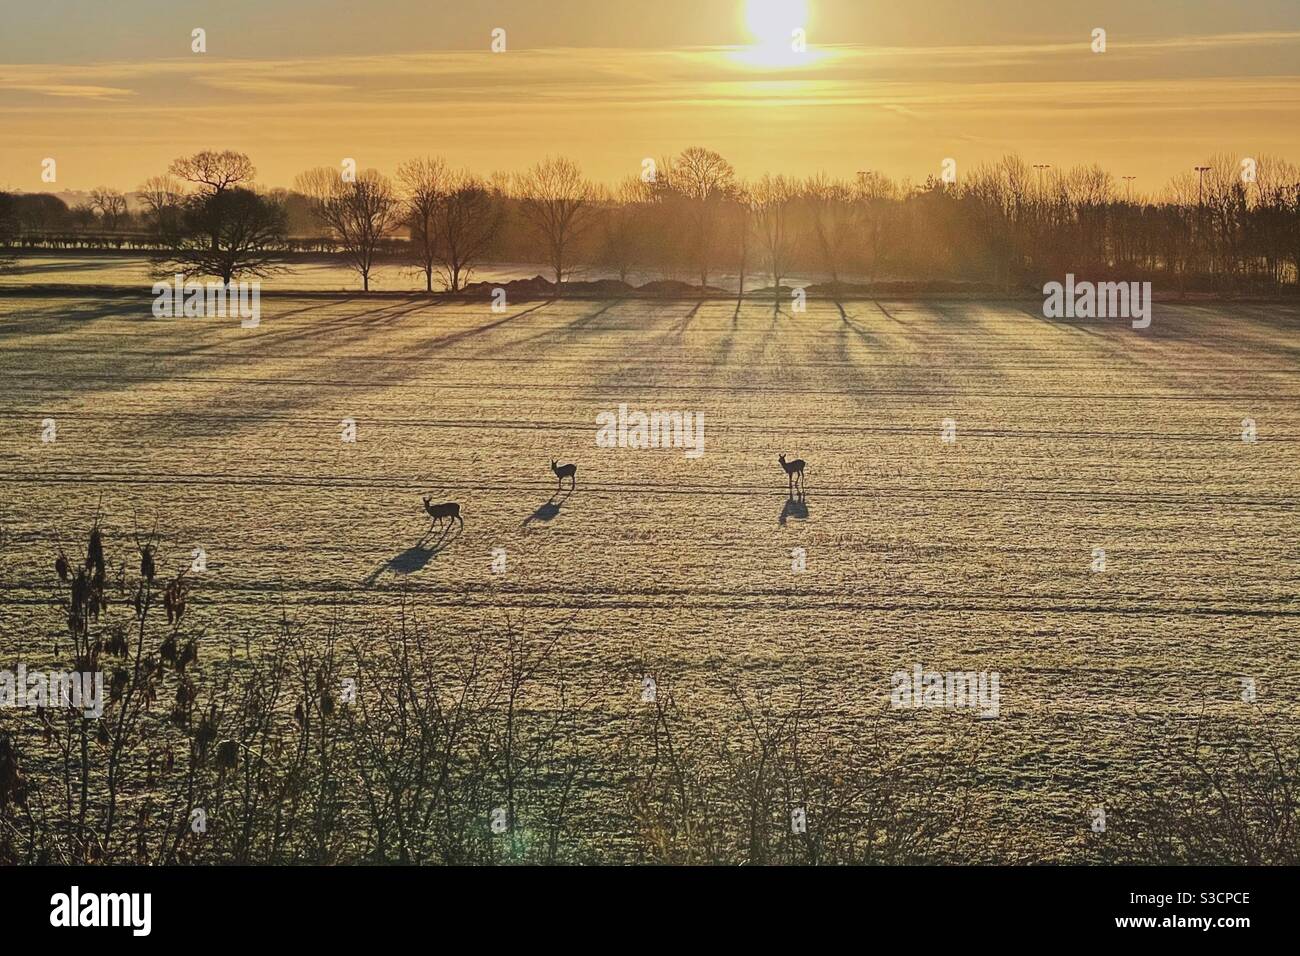 Three deer in frosty field silhouetted by morning sun rise. Stock Photo